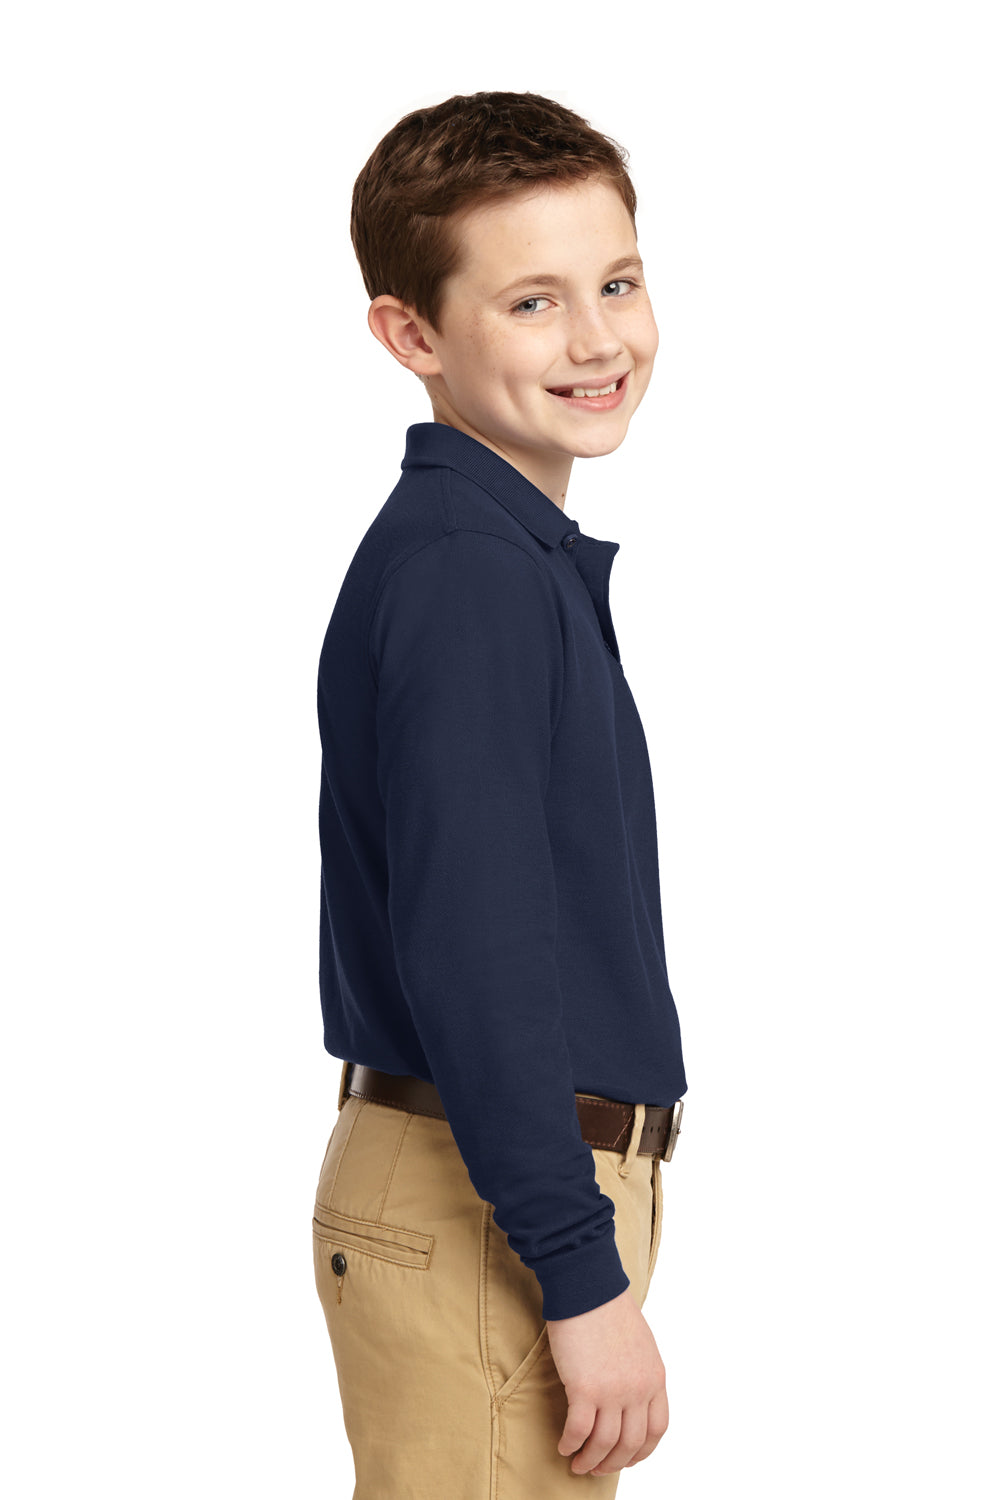 Port Authority Y500LS Youth Silk Touch Wrinkle Resistant Long Sleeve Polo Shirt Navy Blue Side